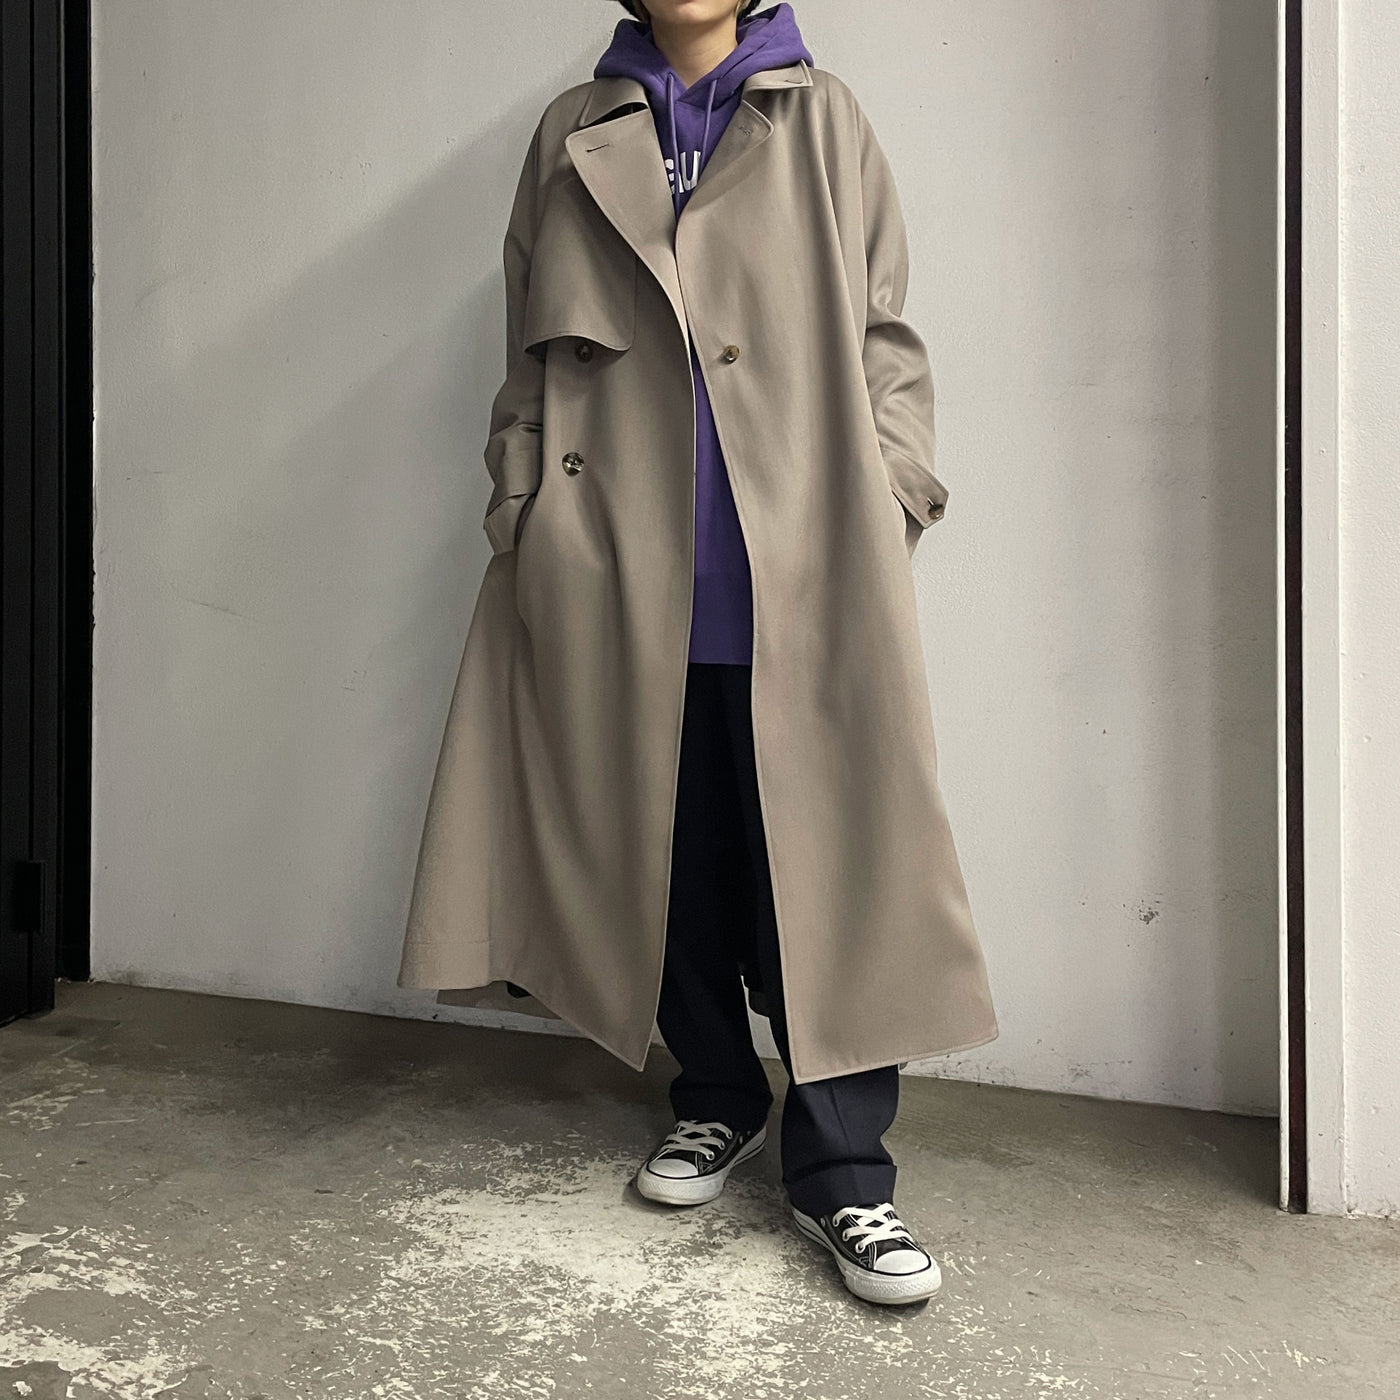 【THE RERACS】 THE TRENCH<br>【INSCRIRE】 VAN Vanguards Athletic Club Parker<br>